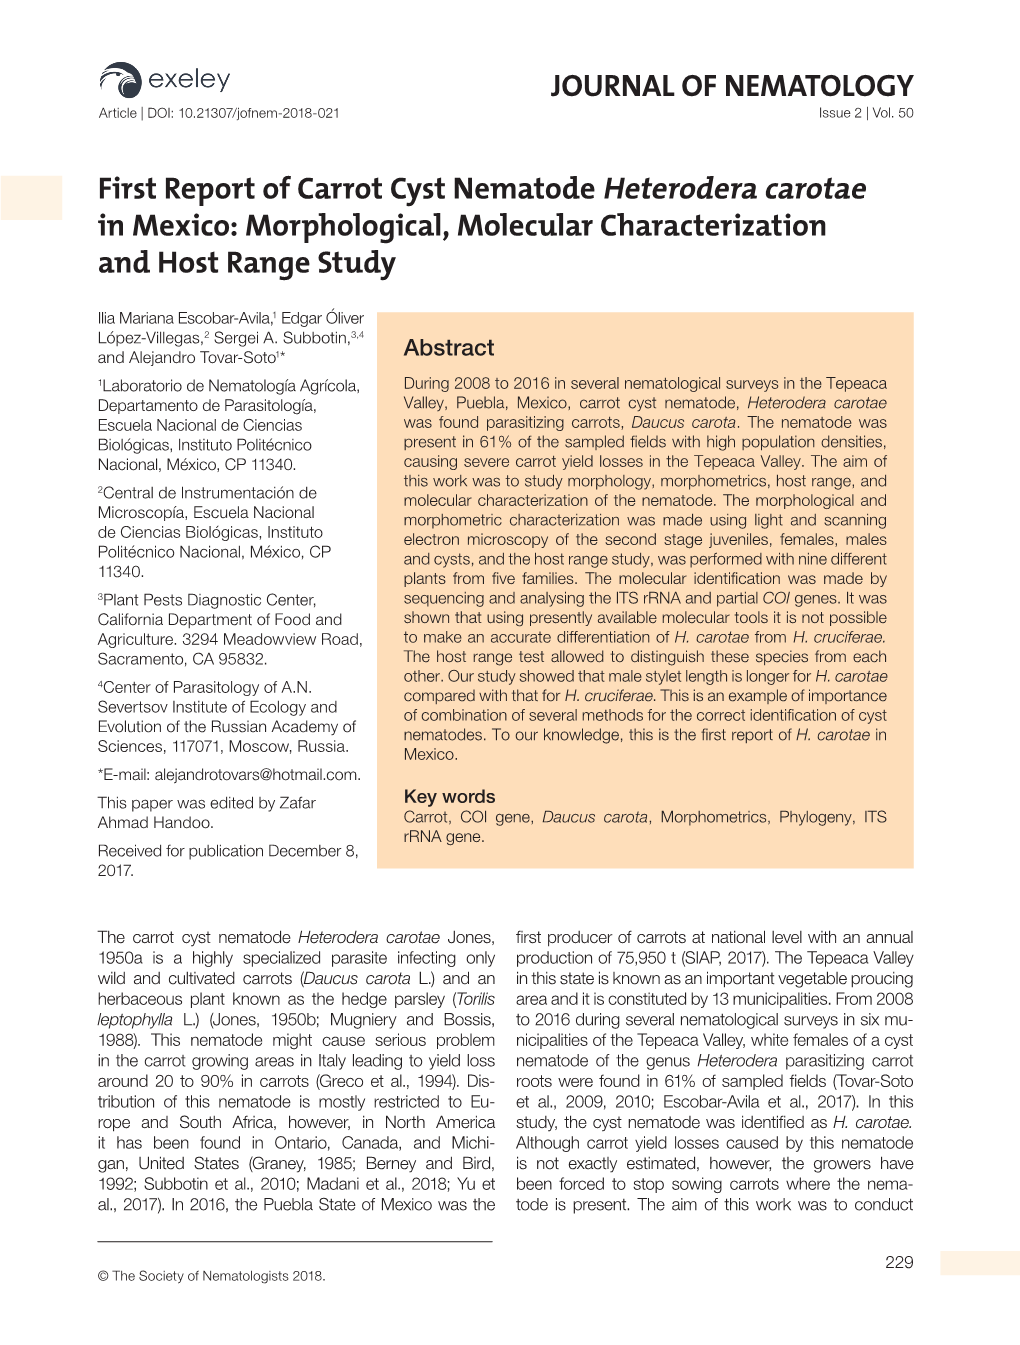 First Report of Carrot Cyst Nematode Heterodera Carotae in Mexico: Morphological, Molecular Characterization and Host Range Study